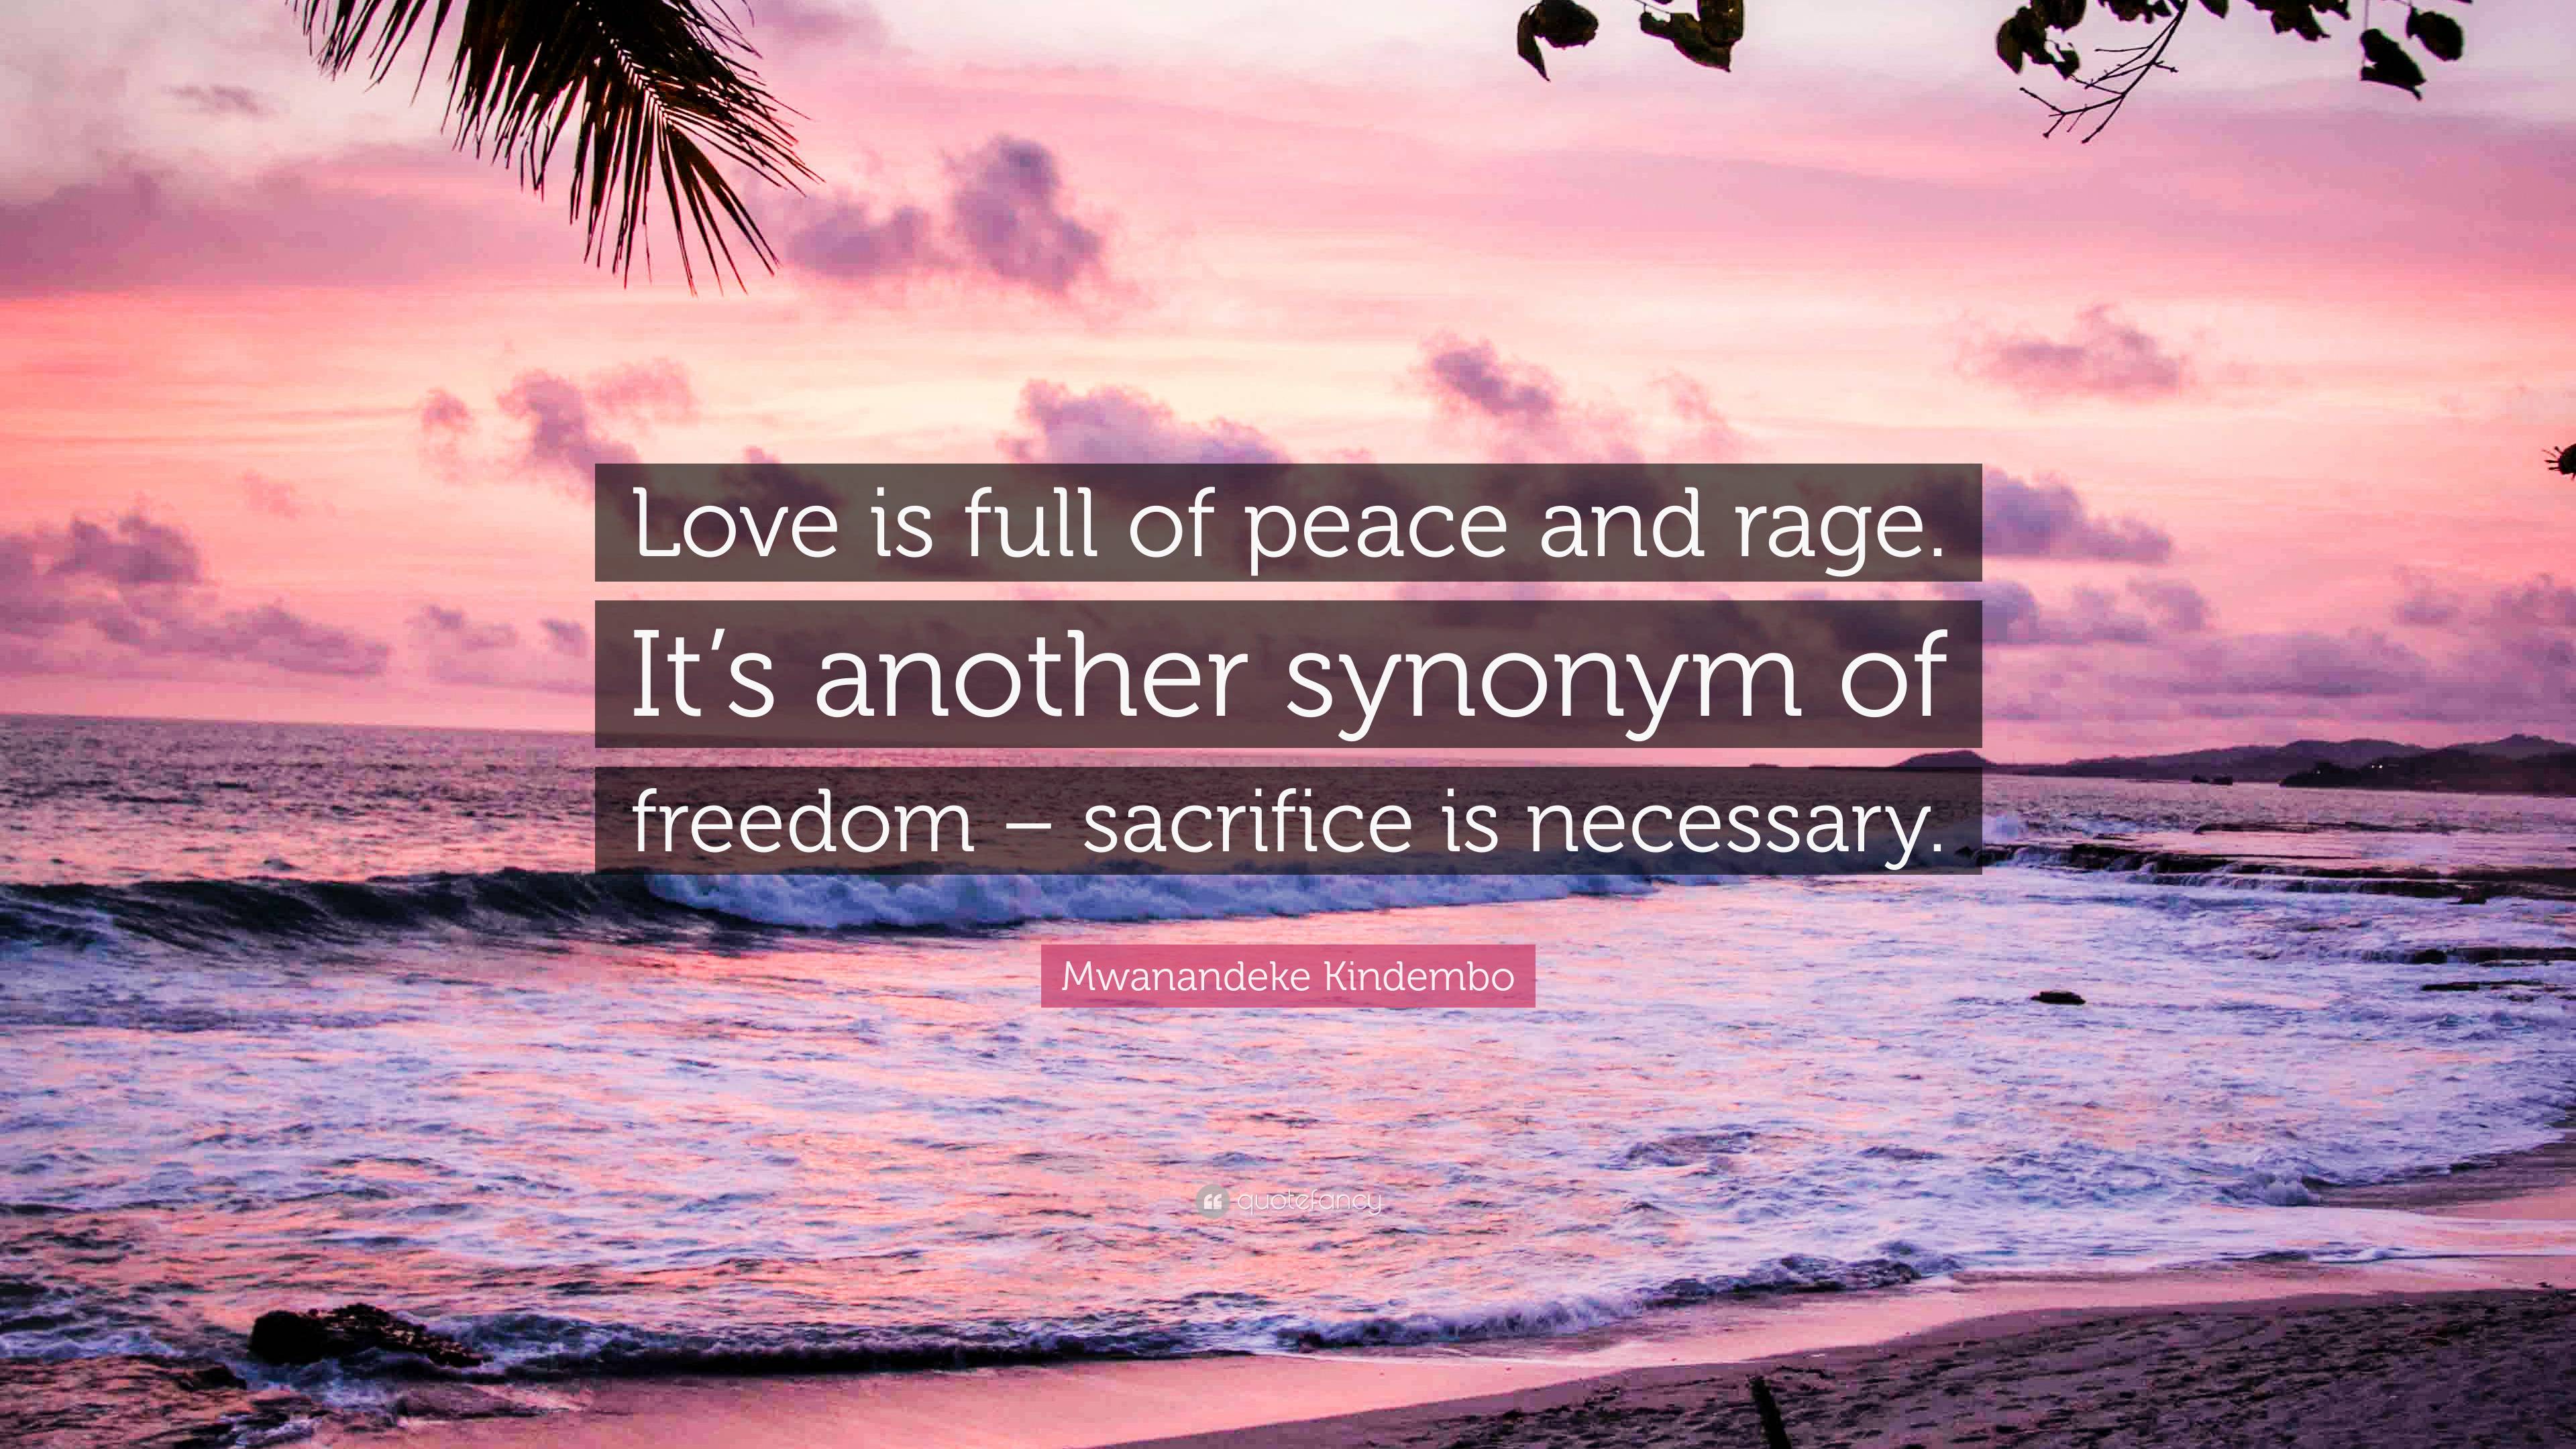 Mwanandeke Kindembo Quote: “Love is full of peace and rage. It's another  synonym of freedom – sacrifice